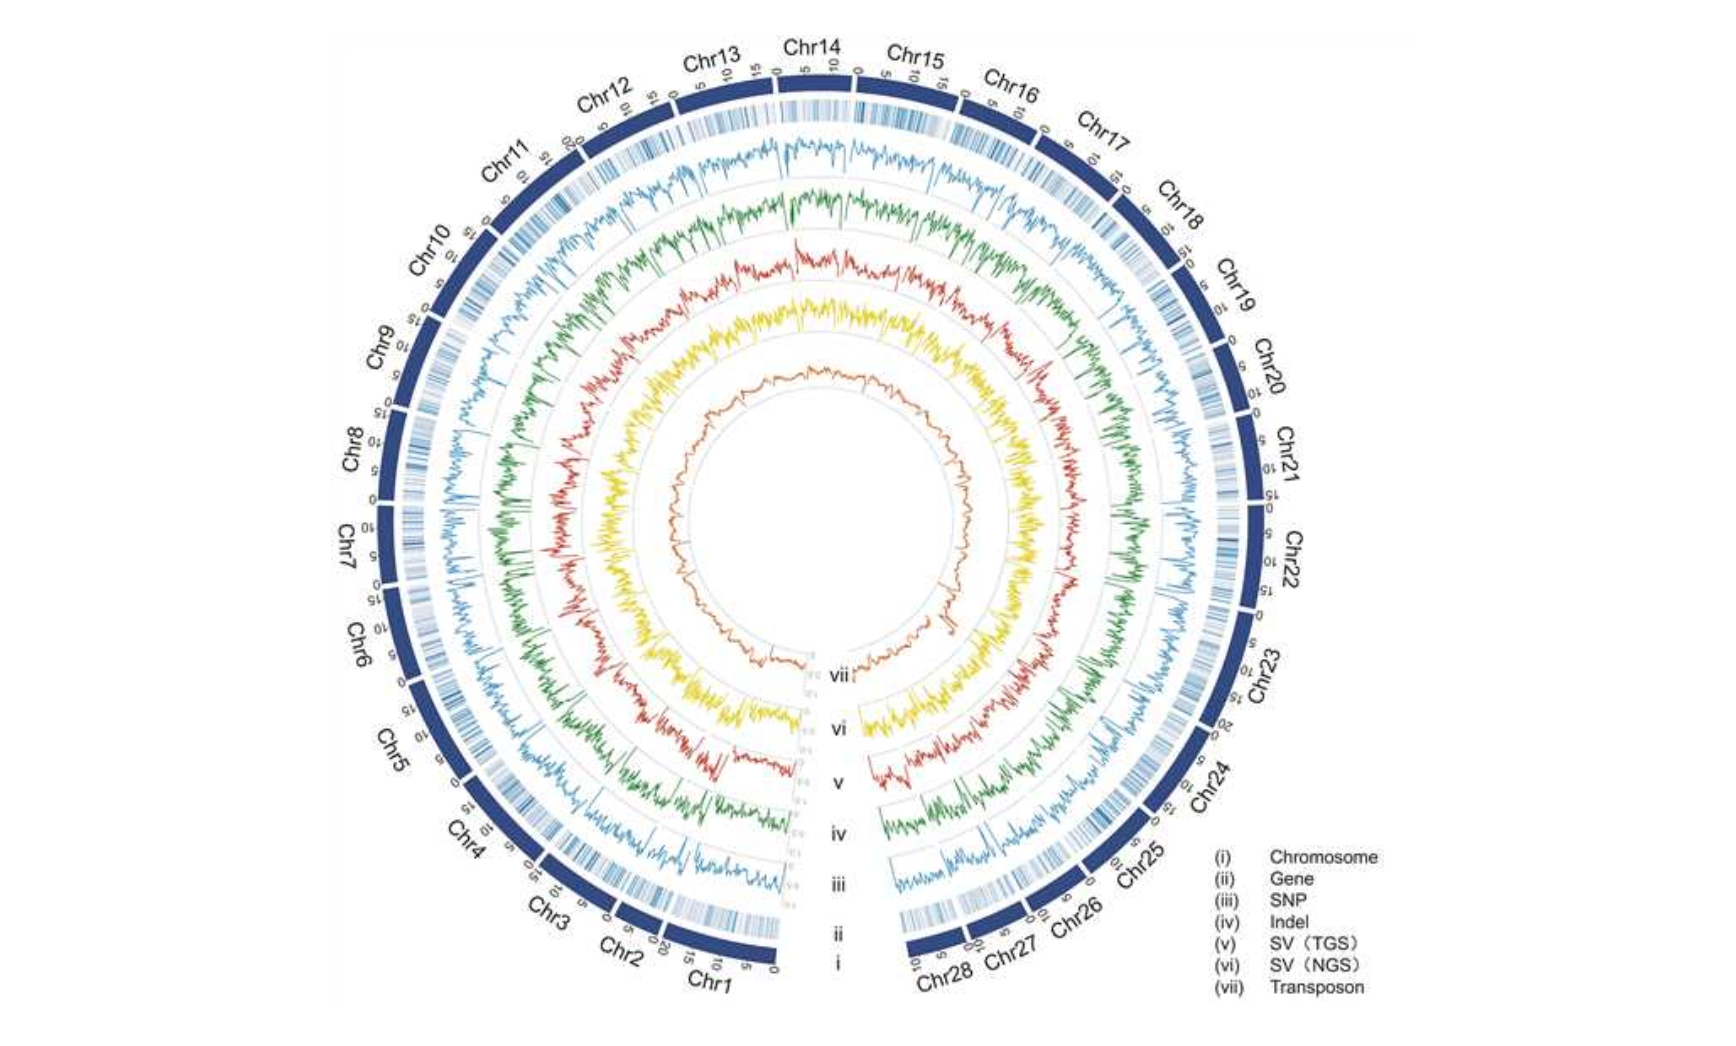 A super pan-genome map of the silkworm. /State Key Laboratory of Silkworm Genome Biology